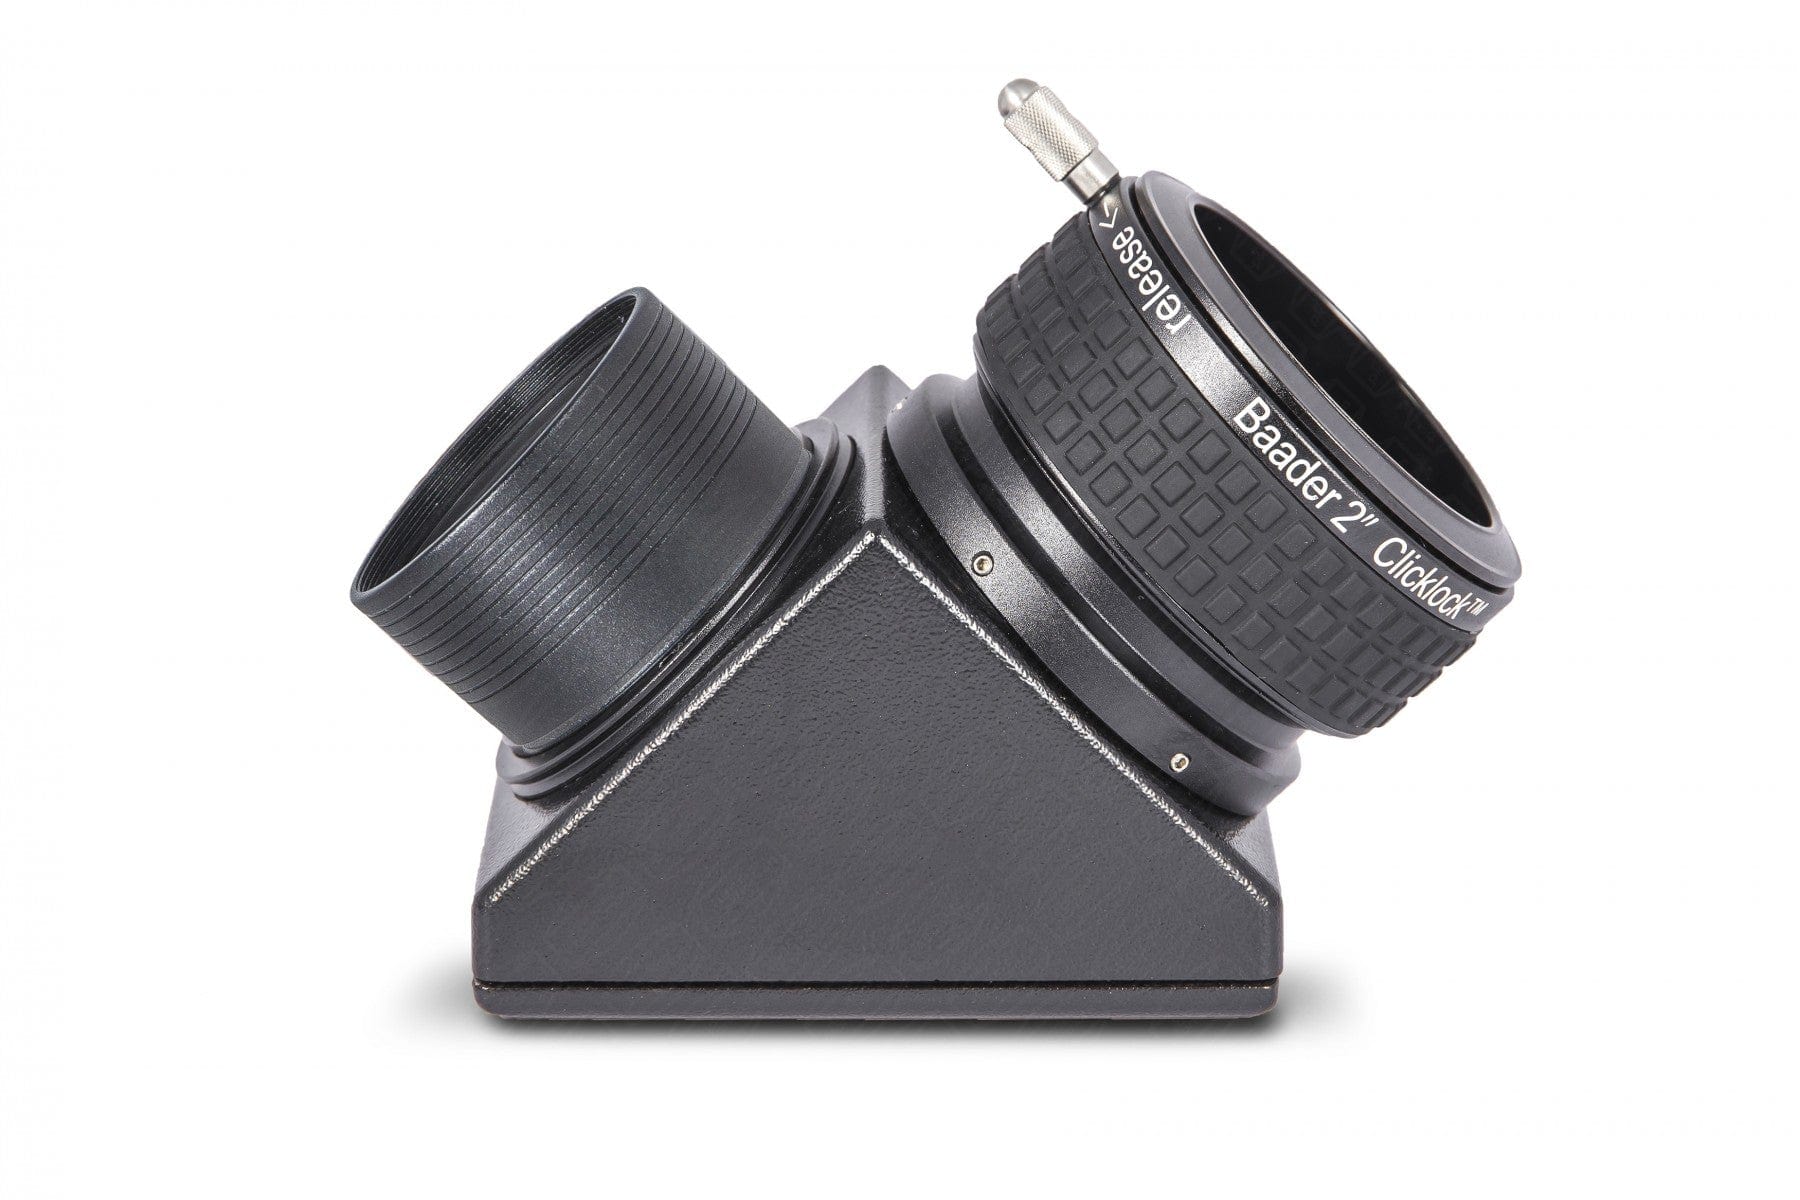 Baader Planetarium Accessory Baader 2" BBHS ® Prism Star Diagonal Prism with 2" ClickLock Clamp - 2456117